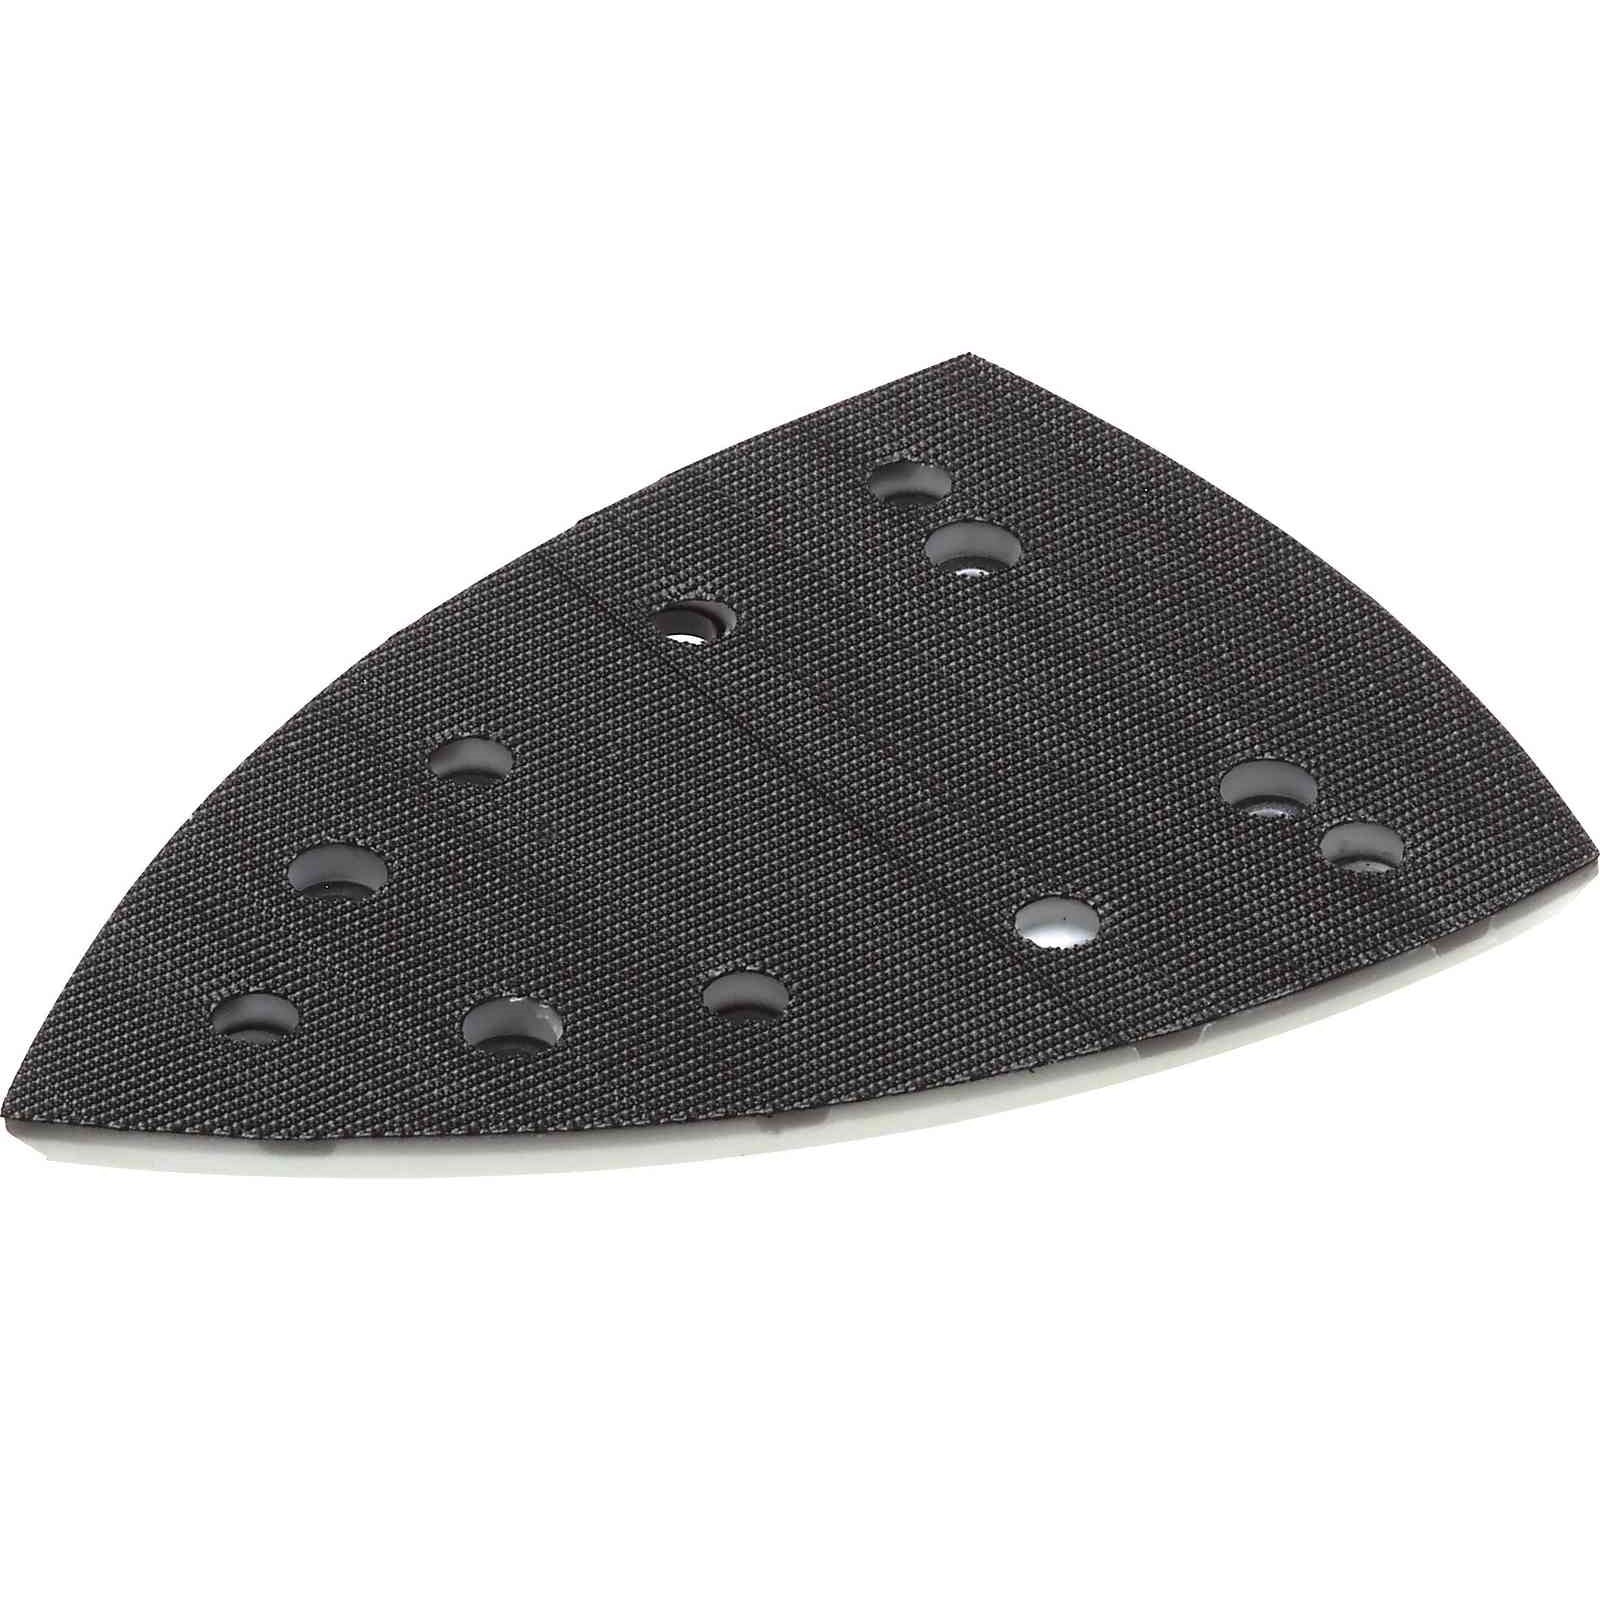 Festool 493723 Replacement Sander Backing Pad for DTS/DTSC 400